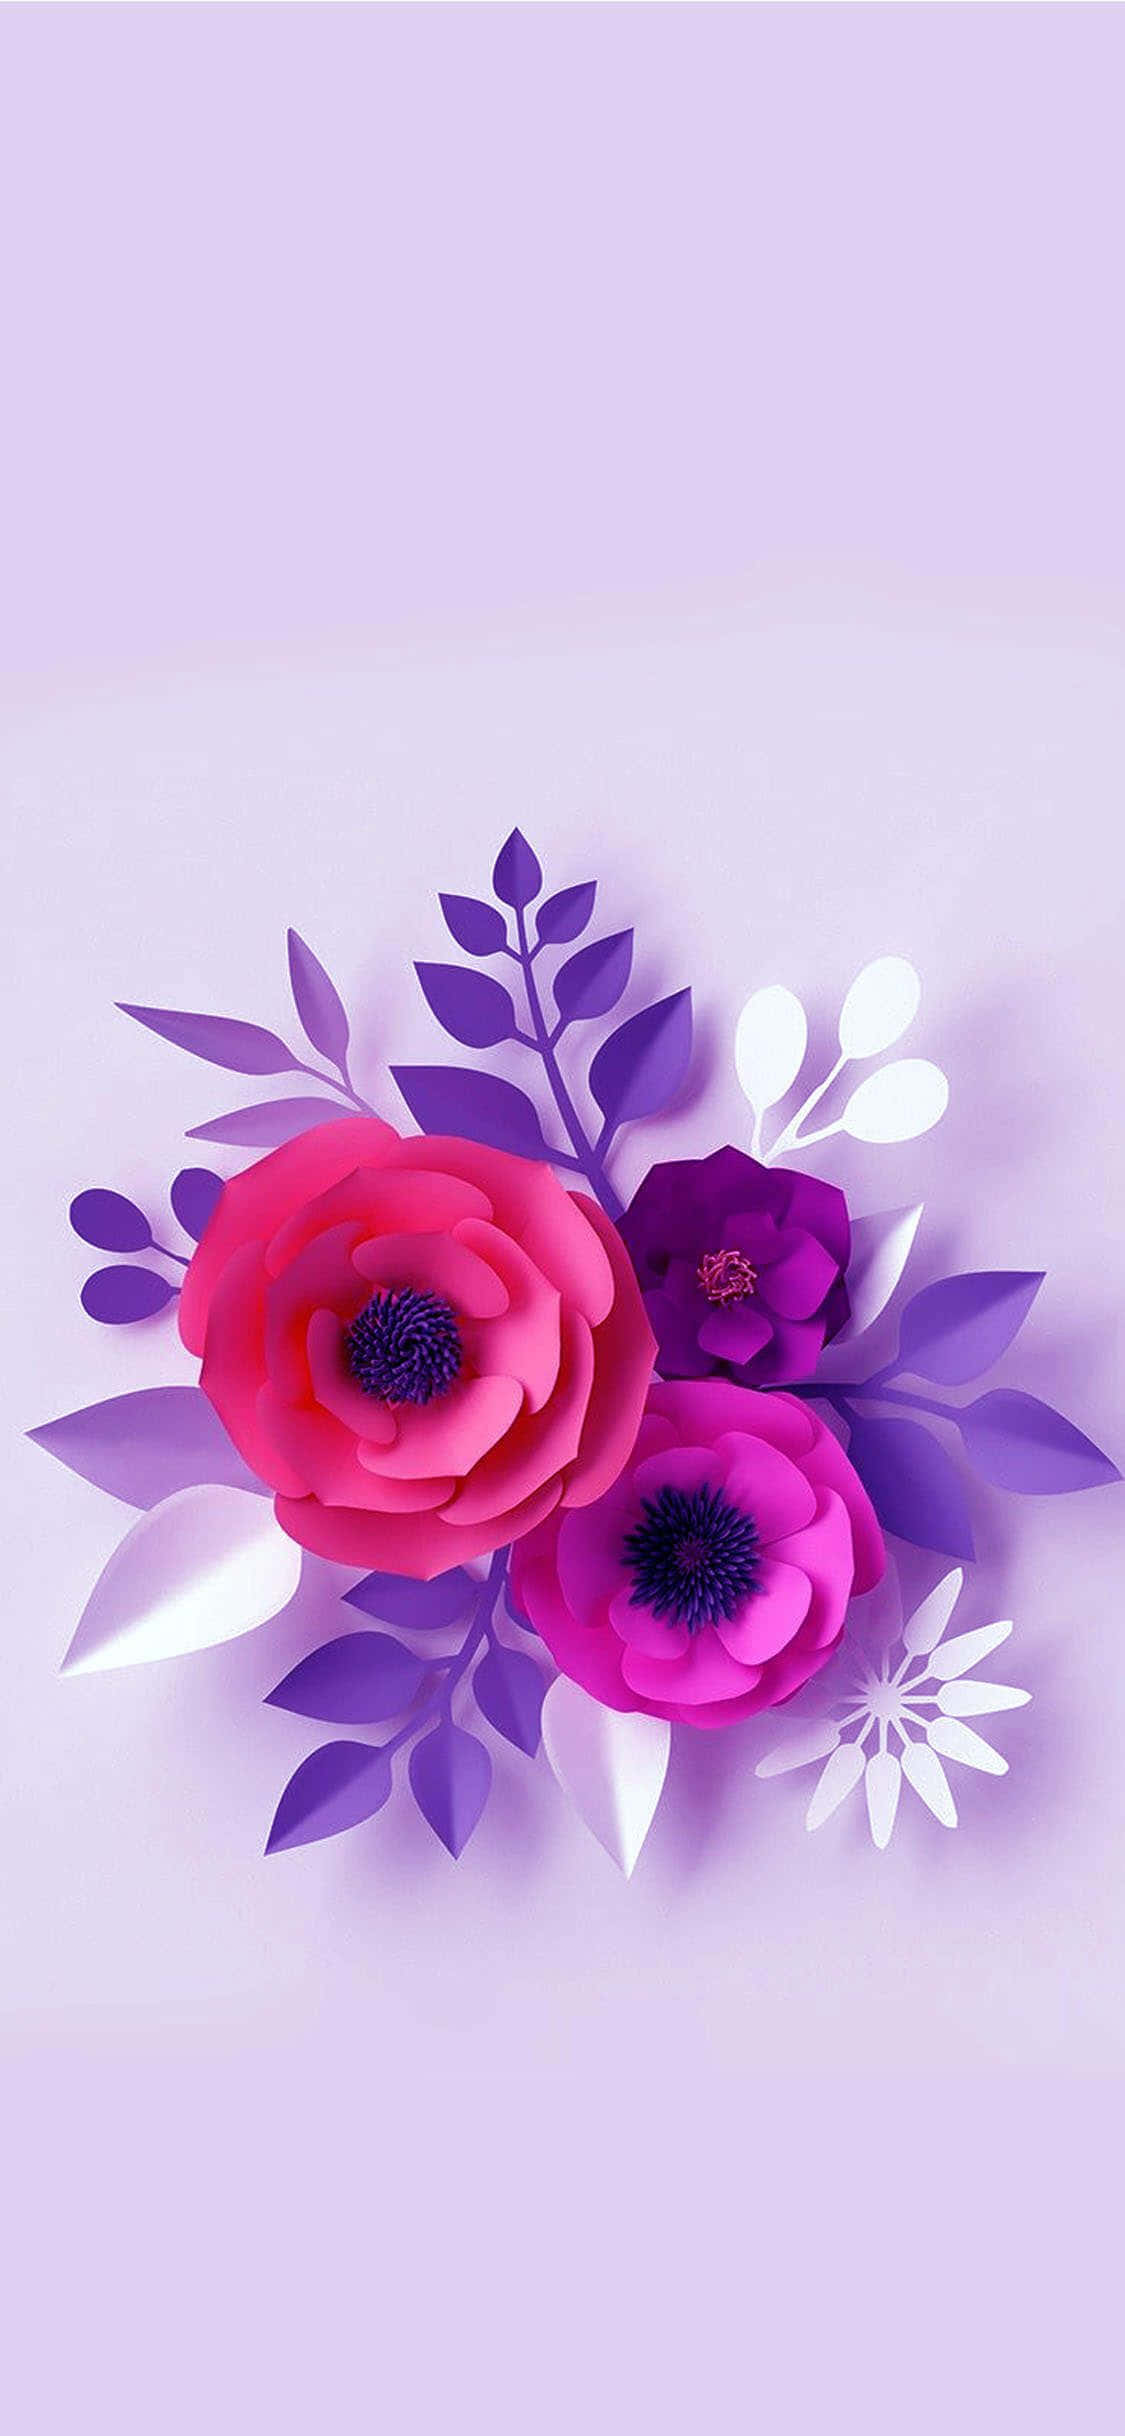 Paper Flowers On A Purple Background